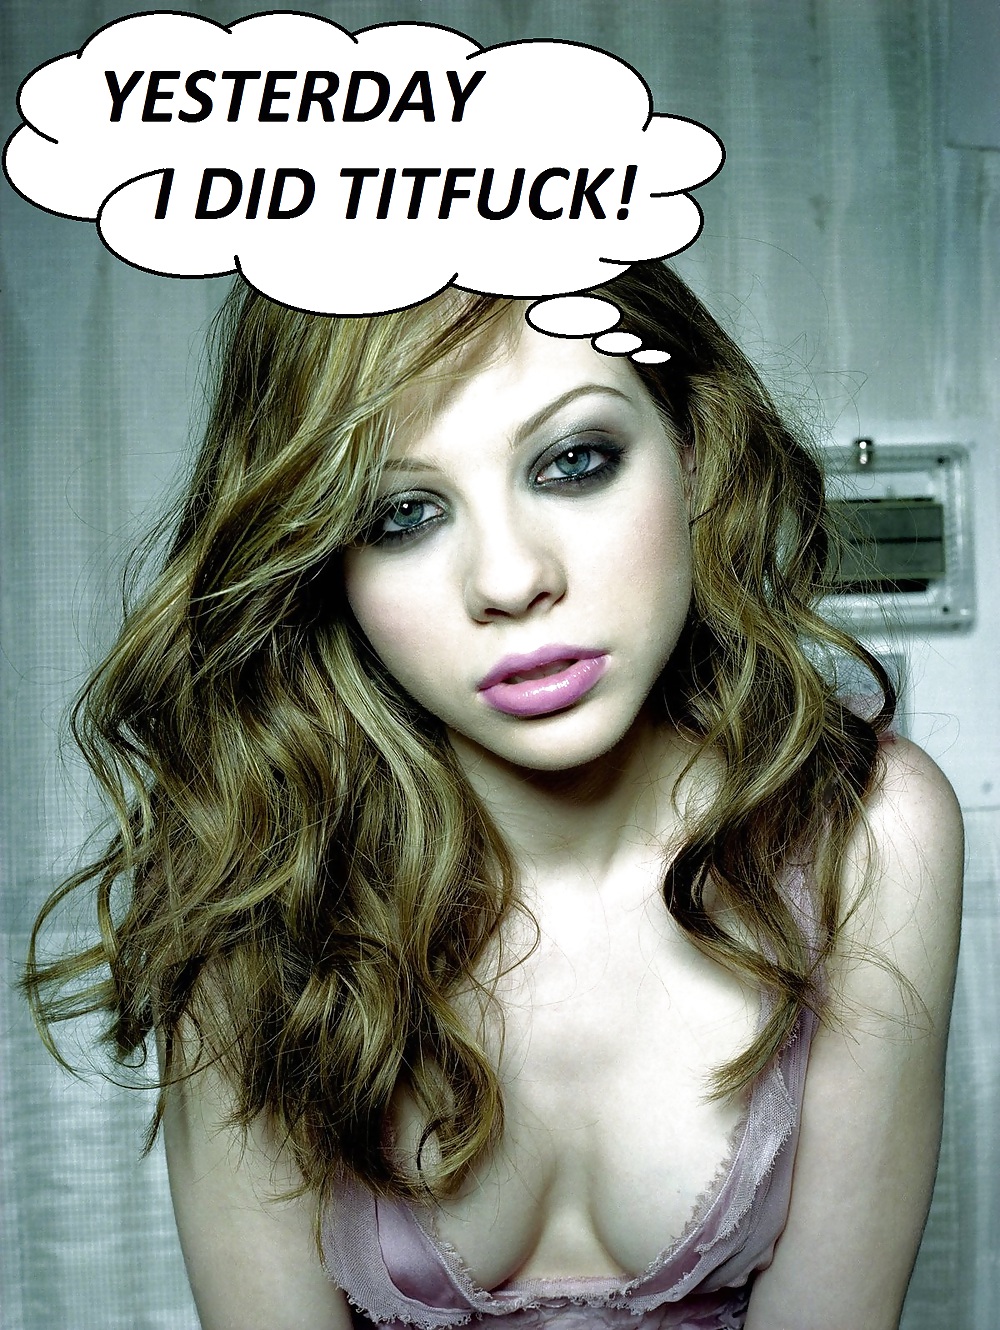 What Michelle Trachtenberg thinks about #7121926